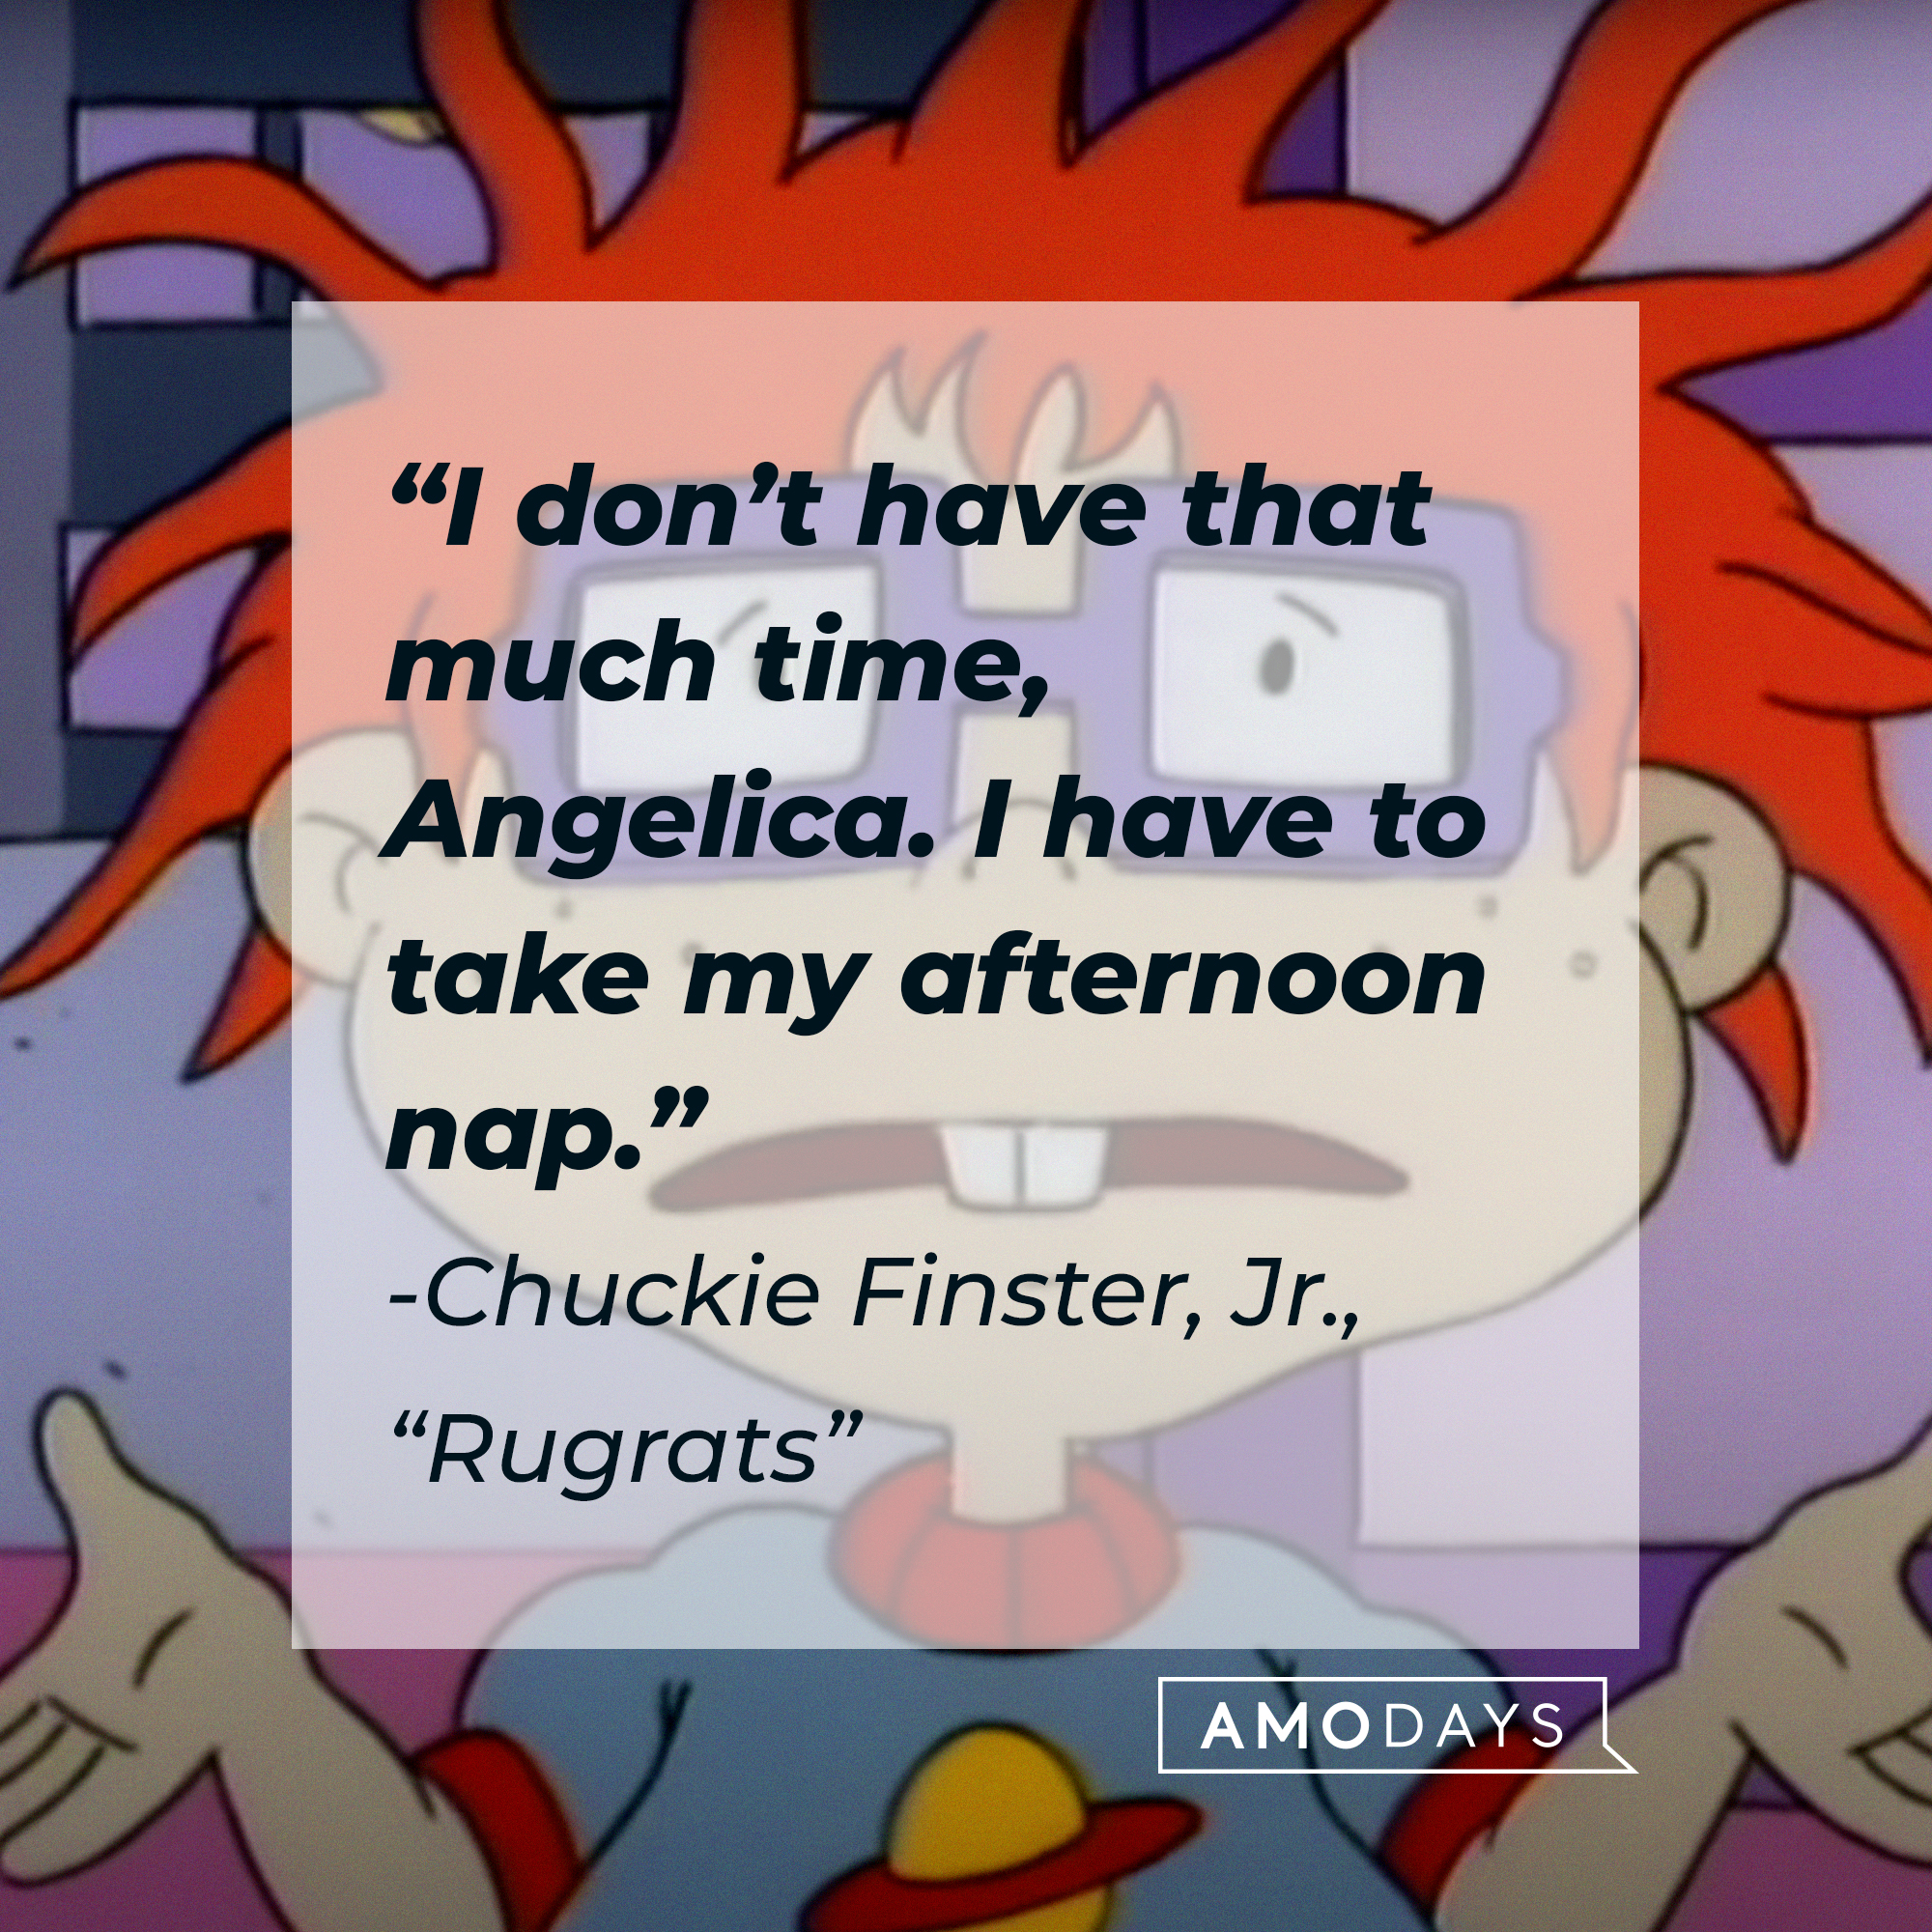 Chuckie Finster Jr. with his quote: “I don’t have that much time, Angelica. I have to take my afternoon nap.” | Source: Facebook.com/Rugrats